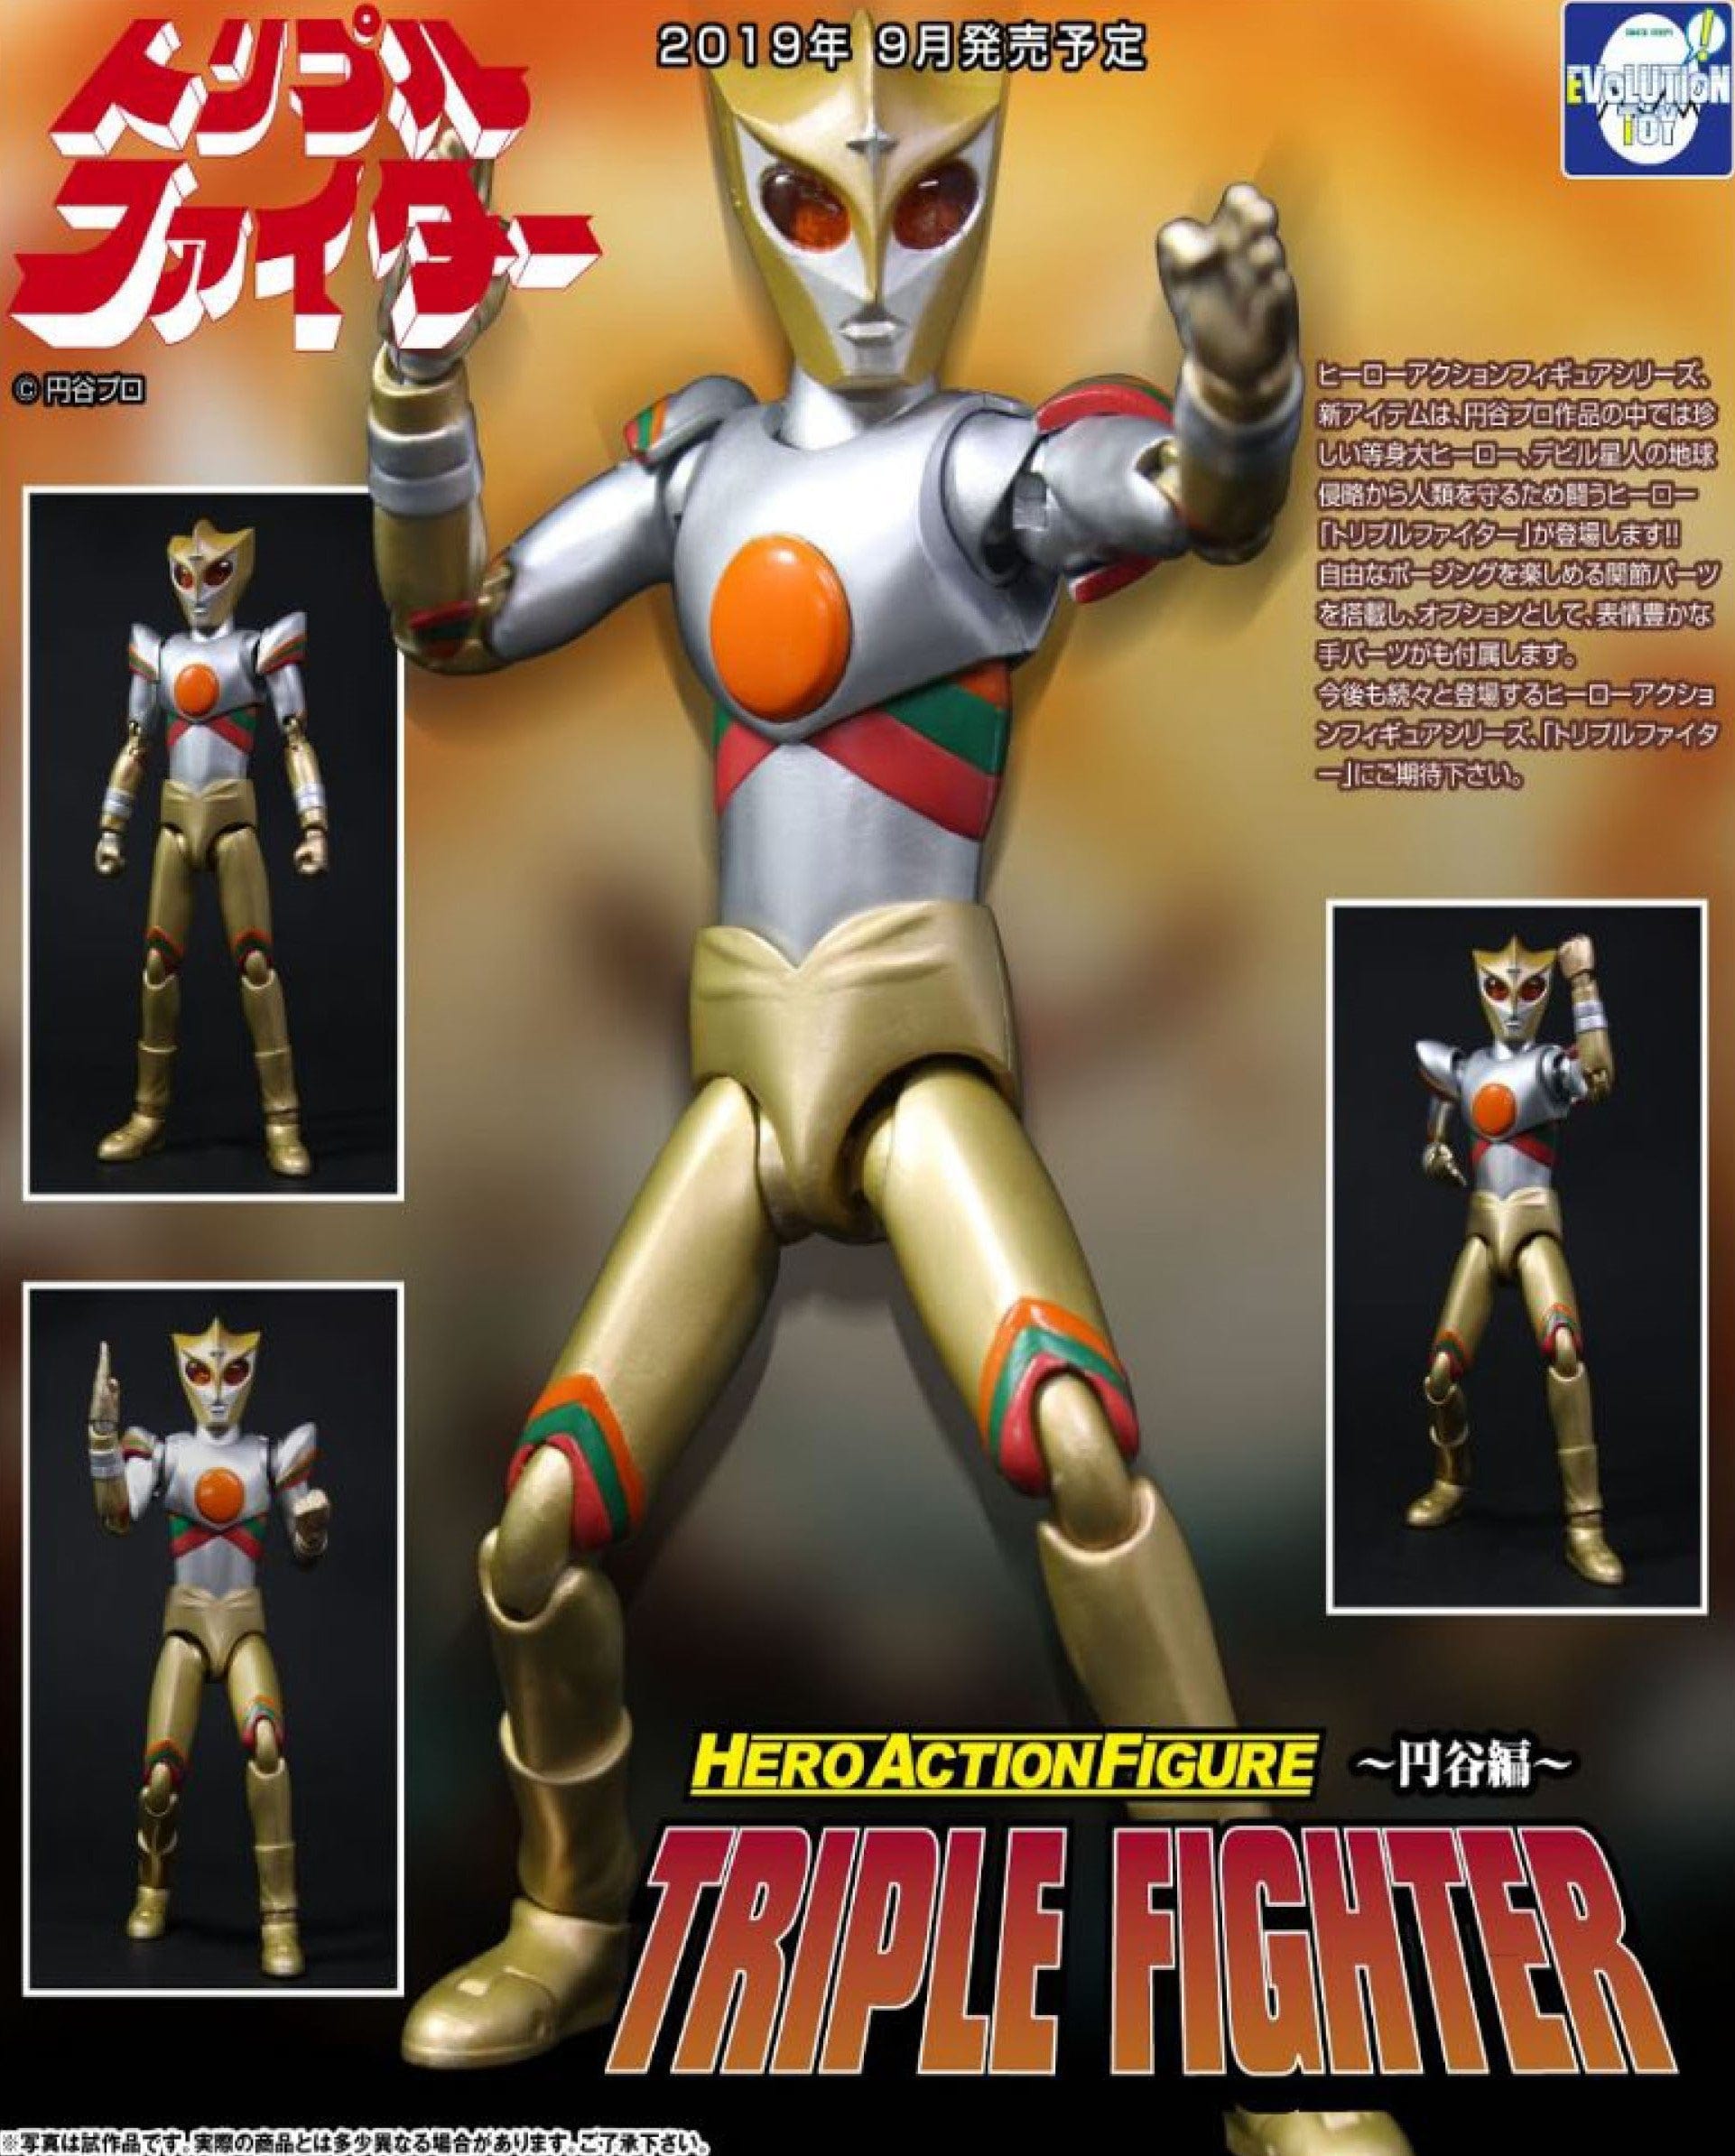 Evolution Toy HERO ACTION FIGURE - TRIPLE FIGHTER